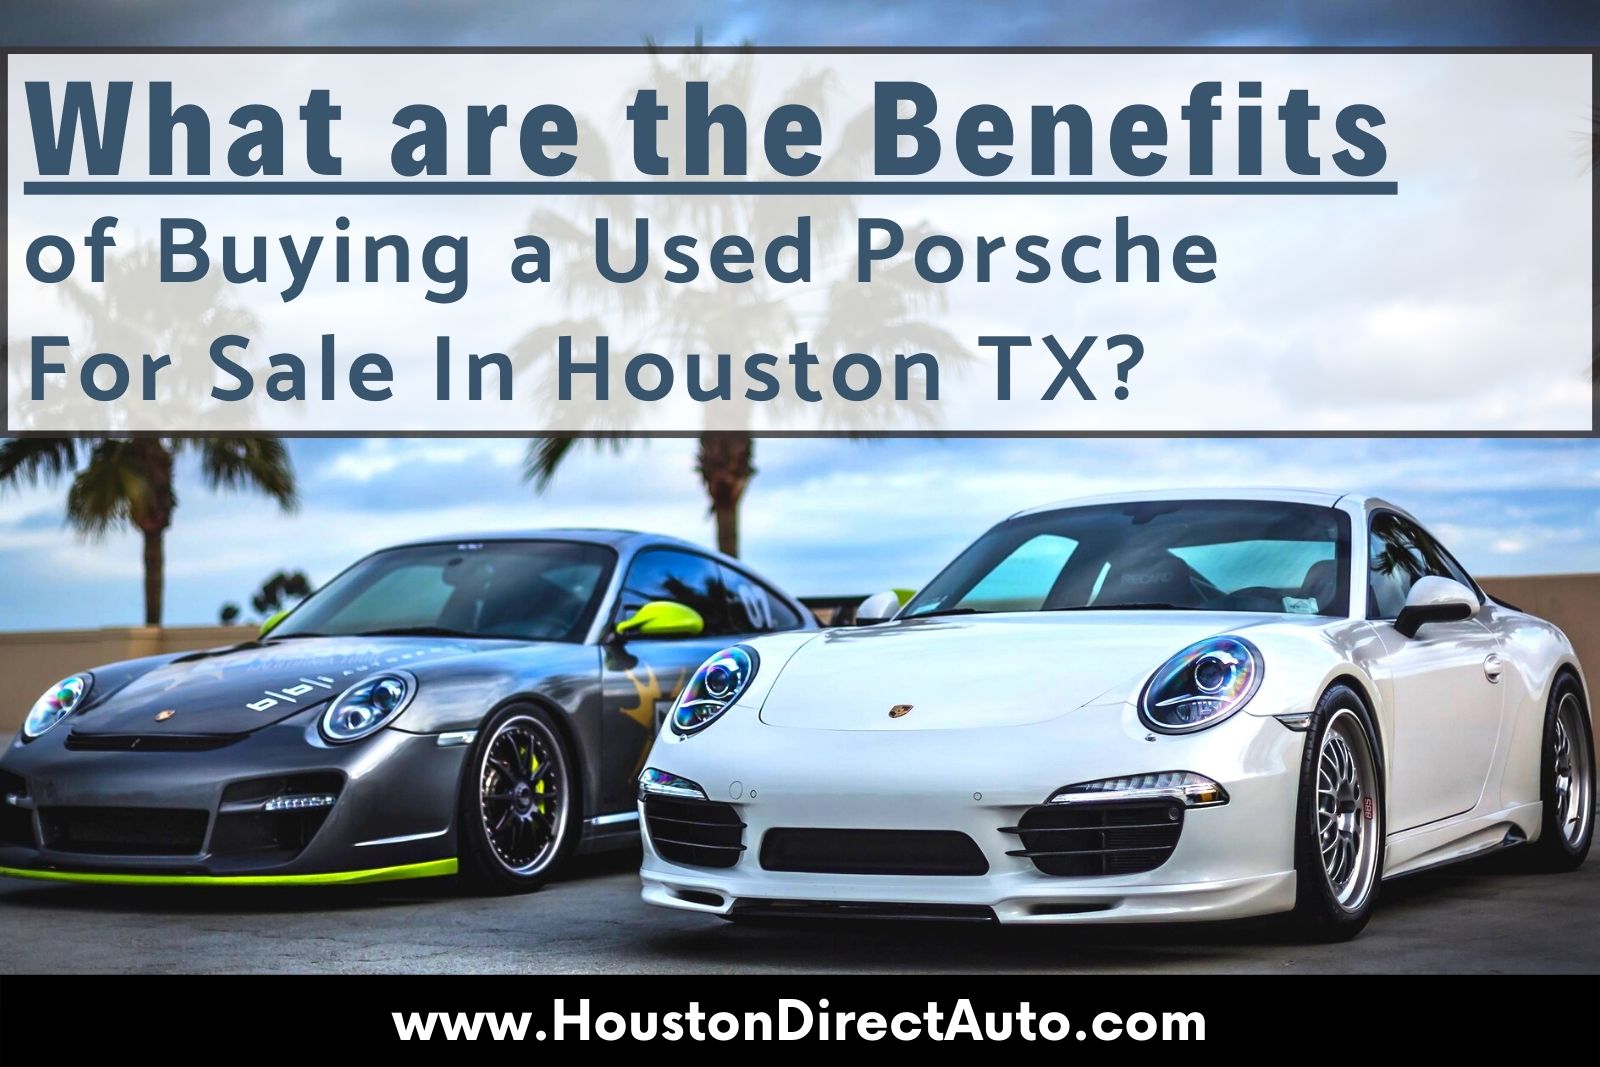 Used Porsche For Sale In Houston TX, Used Auto Dealers Near Me, In House Financing Cars Near Me, Reliable Used Cars Houston, Nearest Used Car Dealership